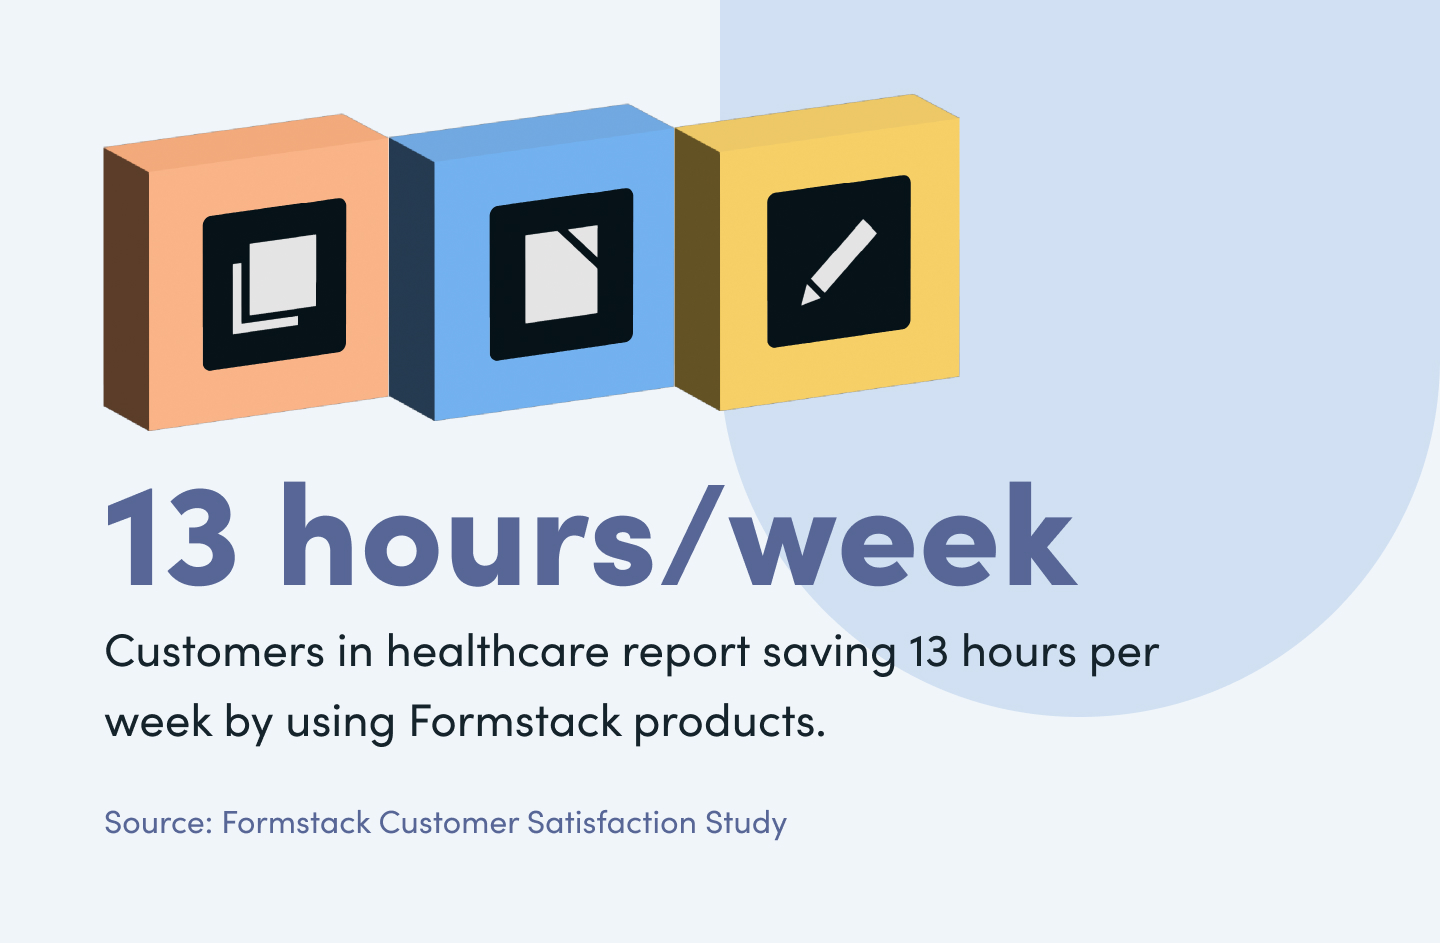 Customers in healthcare report saving 13 hours per week by using Formstack products.